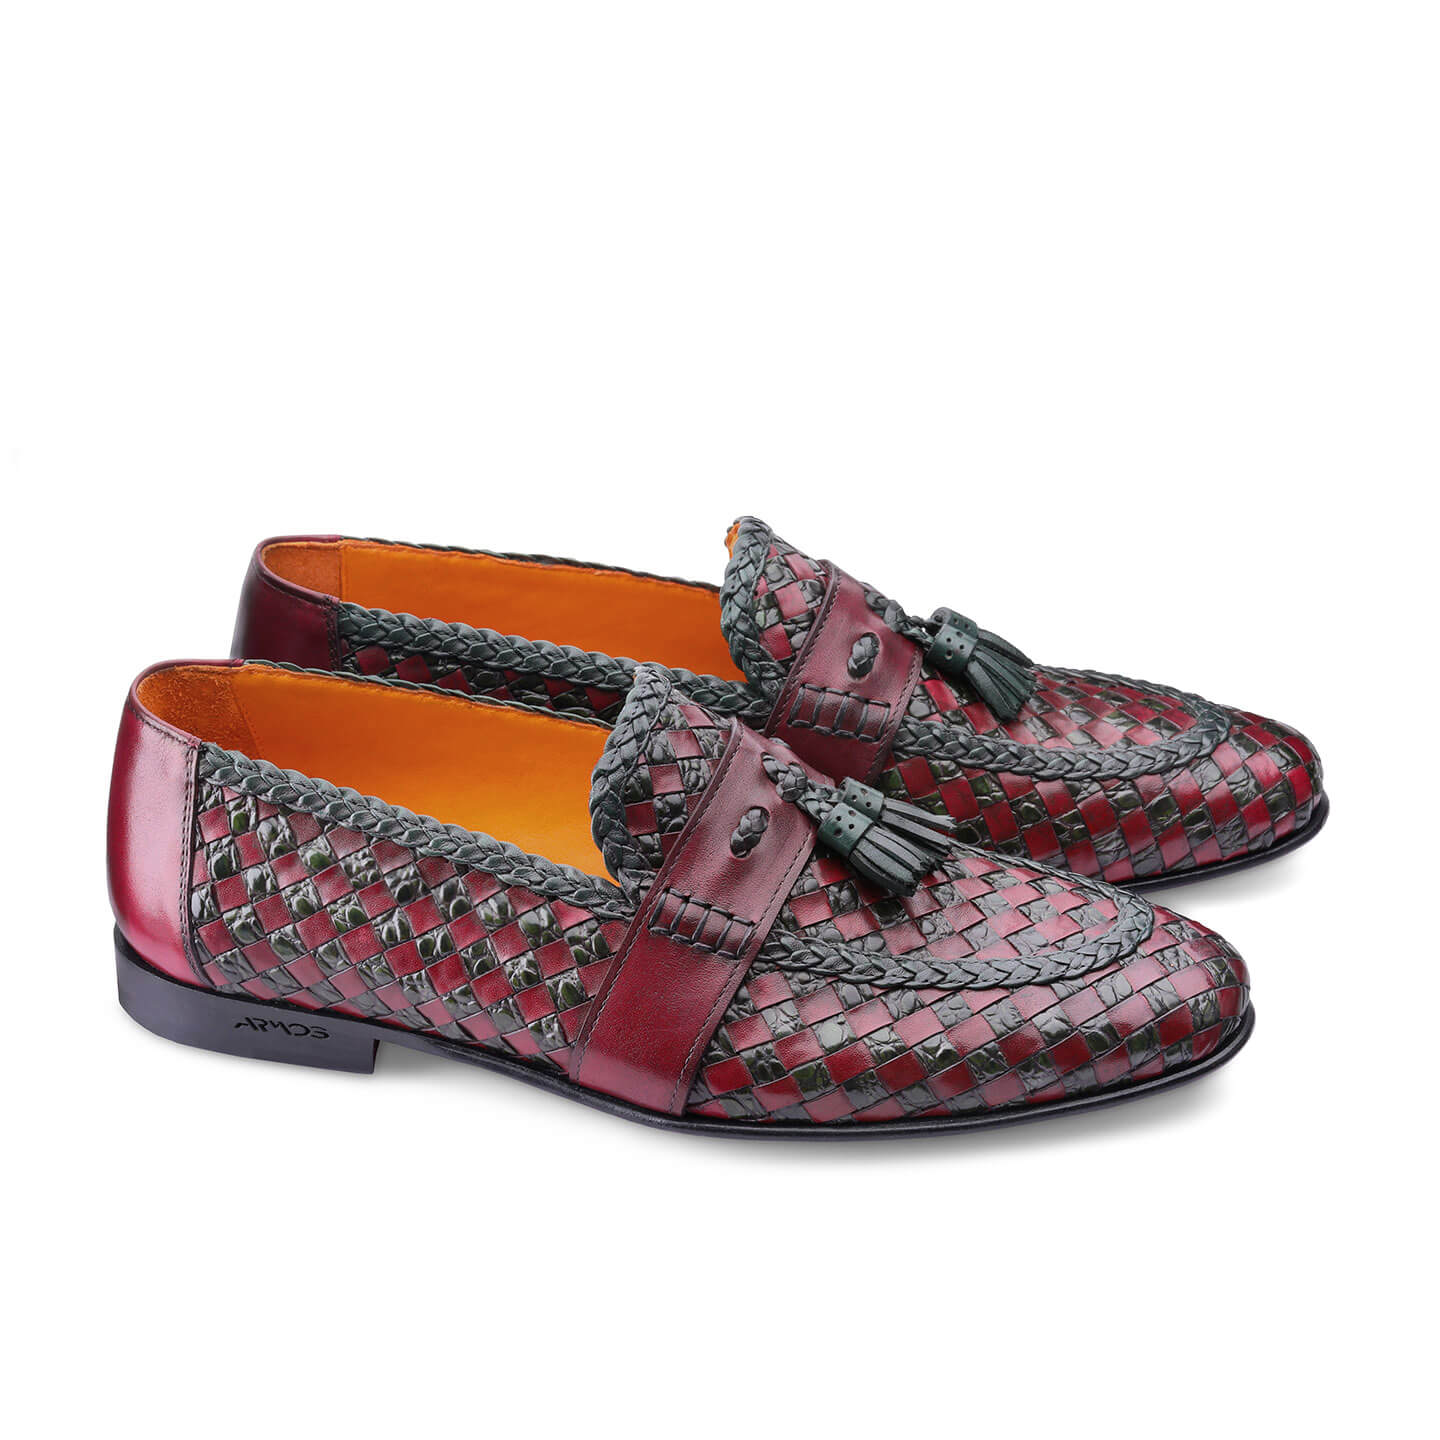 Red-green loafers